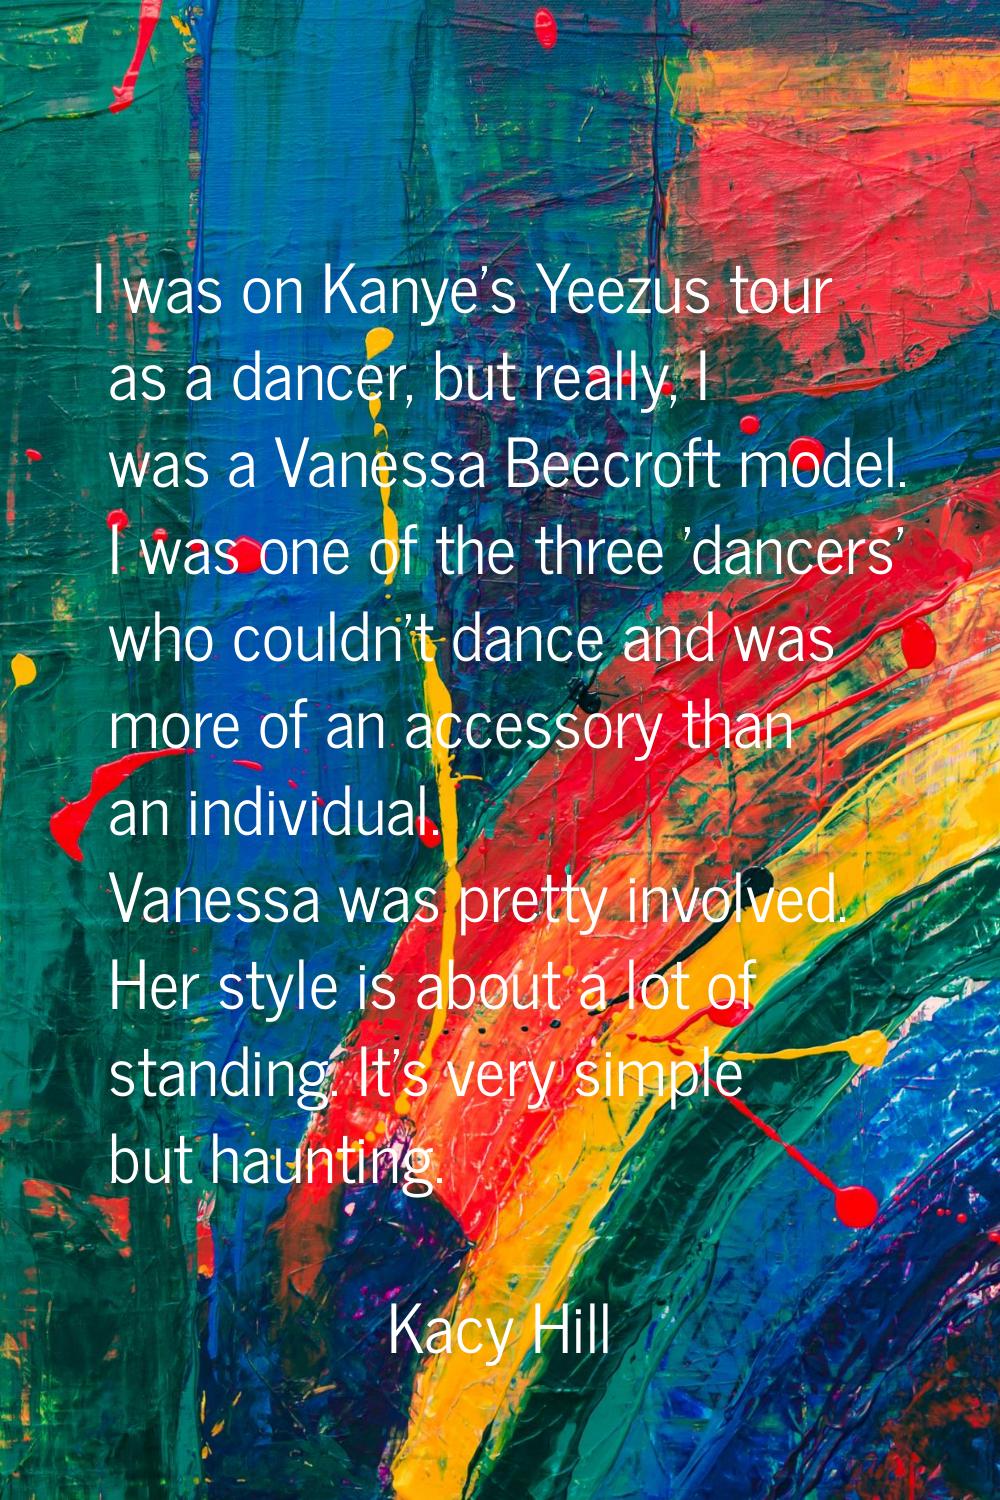 I was on Kanye's Yeezus tour as a dancer, but really, I was a Vanessa Beecroft model. I was one of 